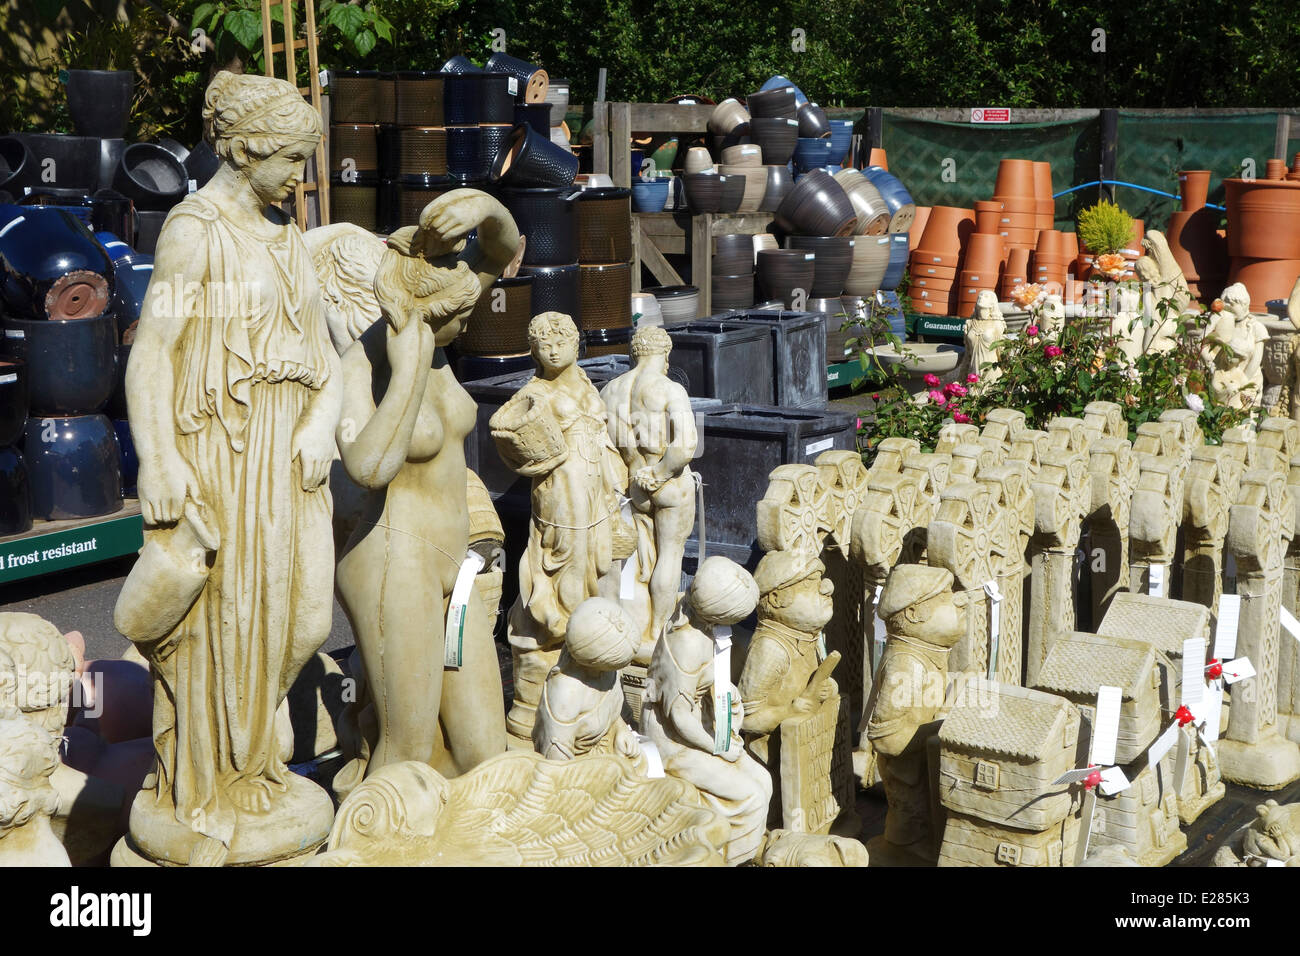 Statues And Ornaments On Sale At Garden Centre Stock Photo